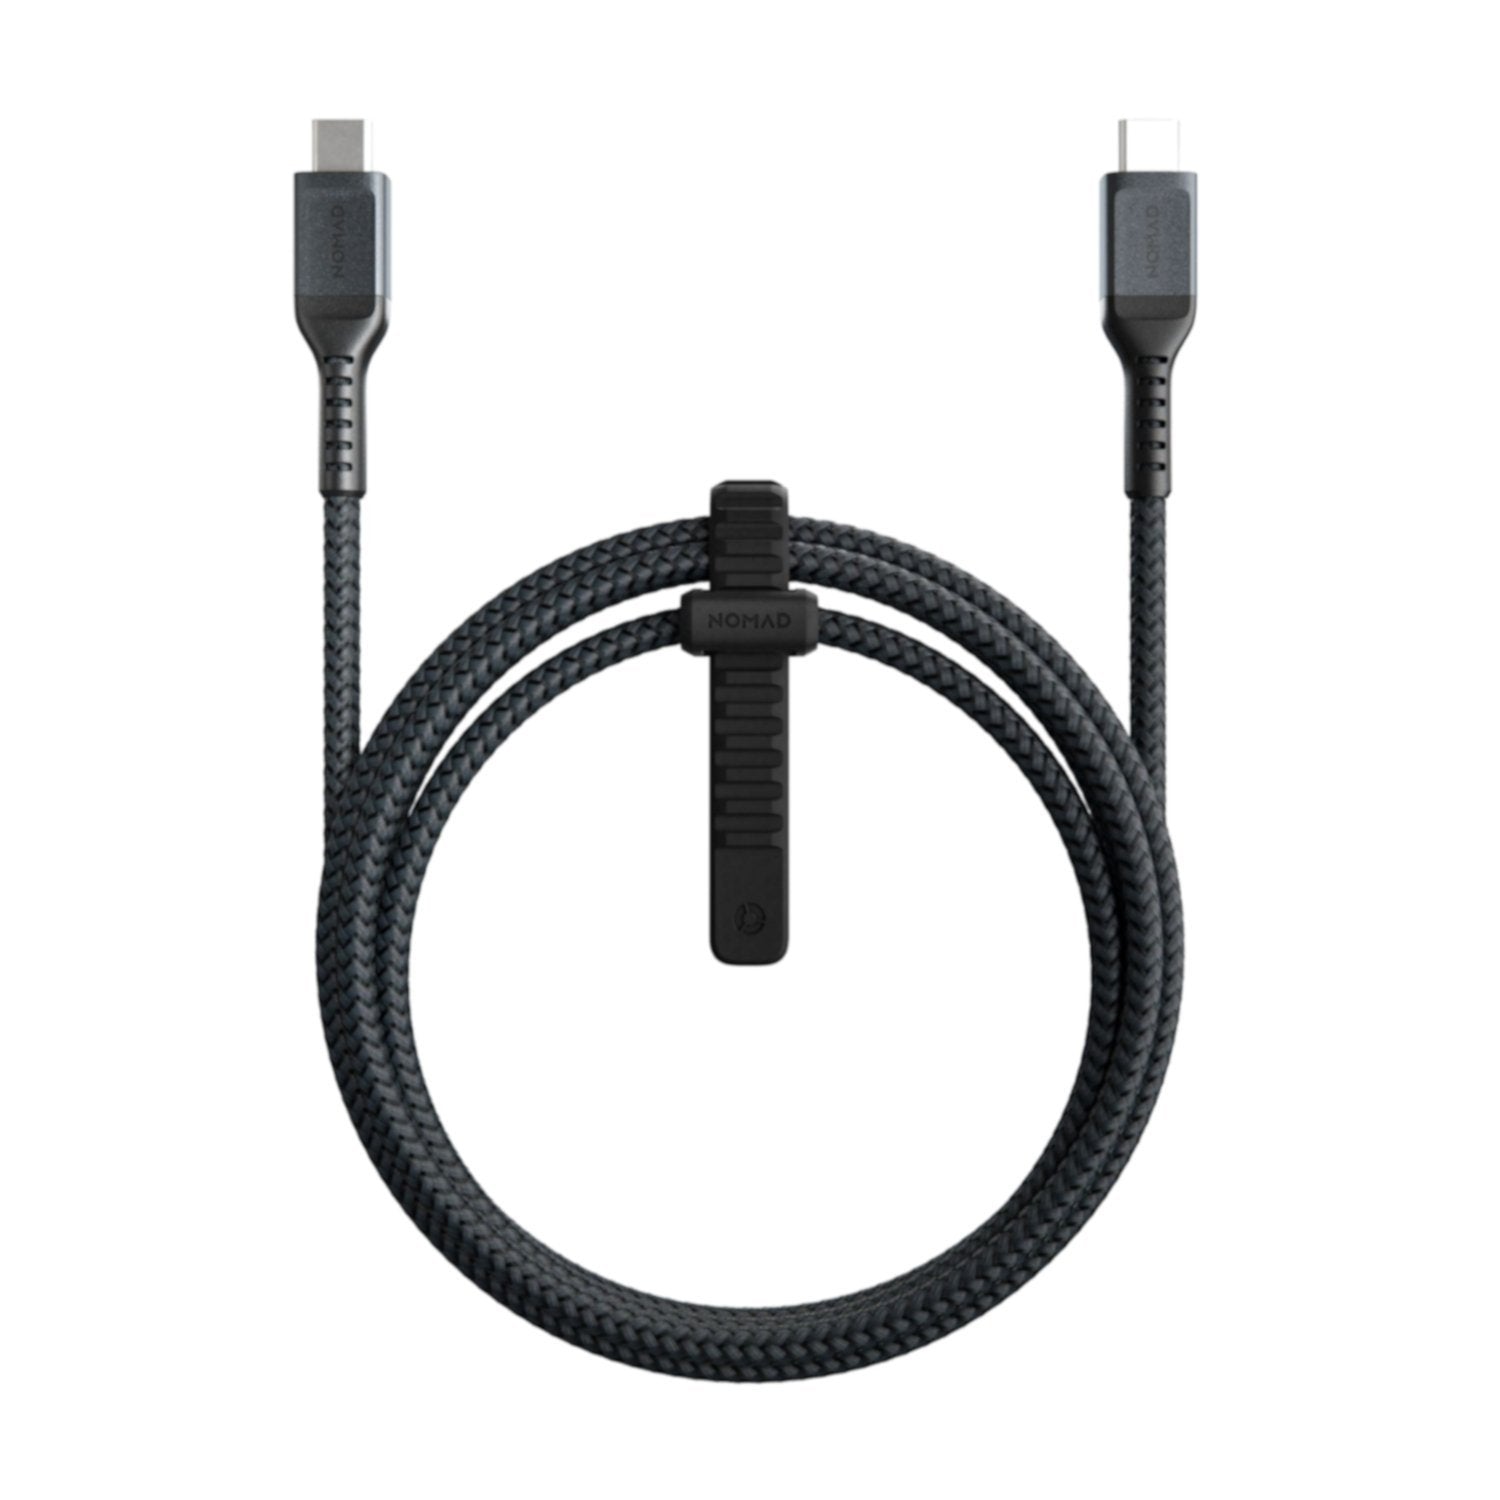 NOMAD Rugged 100W USB-C to USB-C Cables 1M, Black Cable NOMAD 